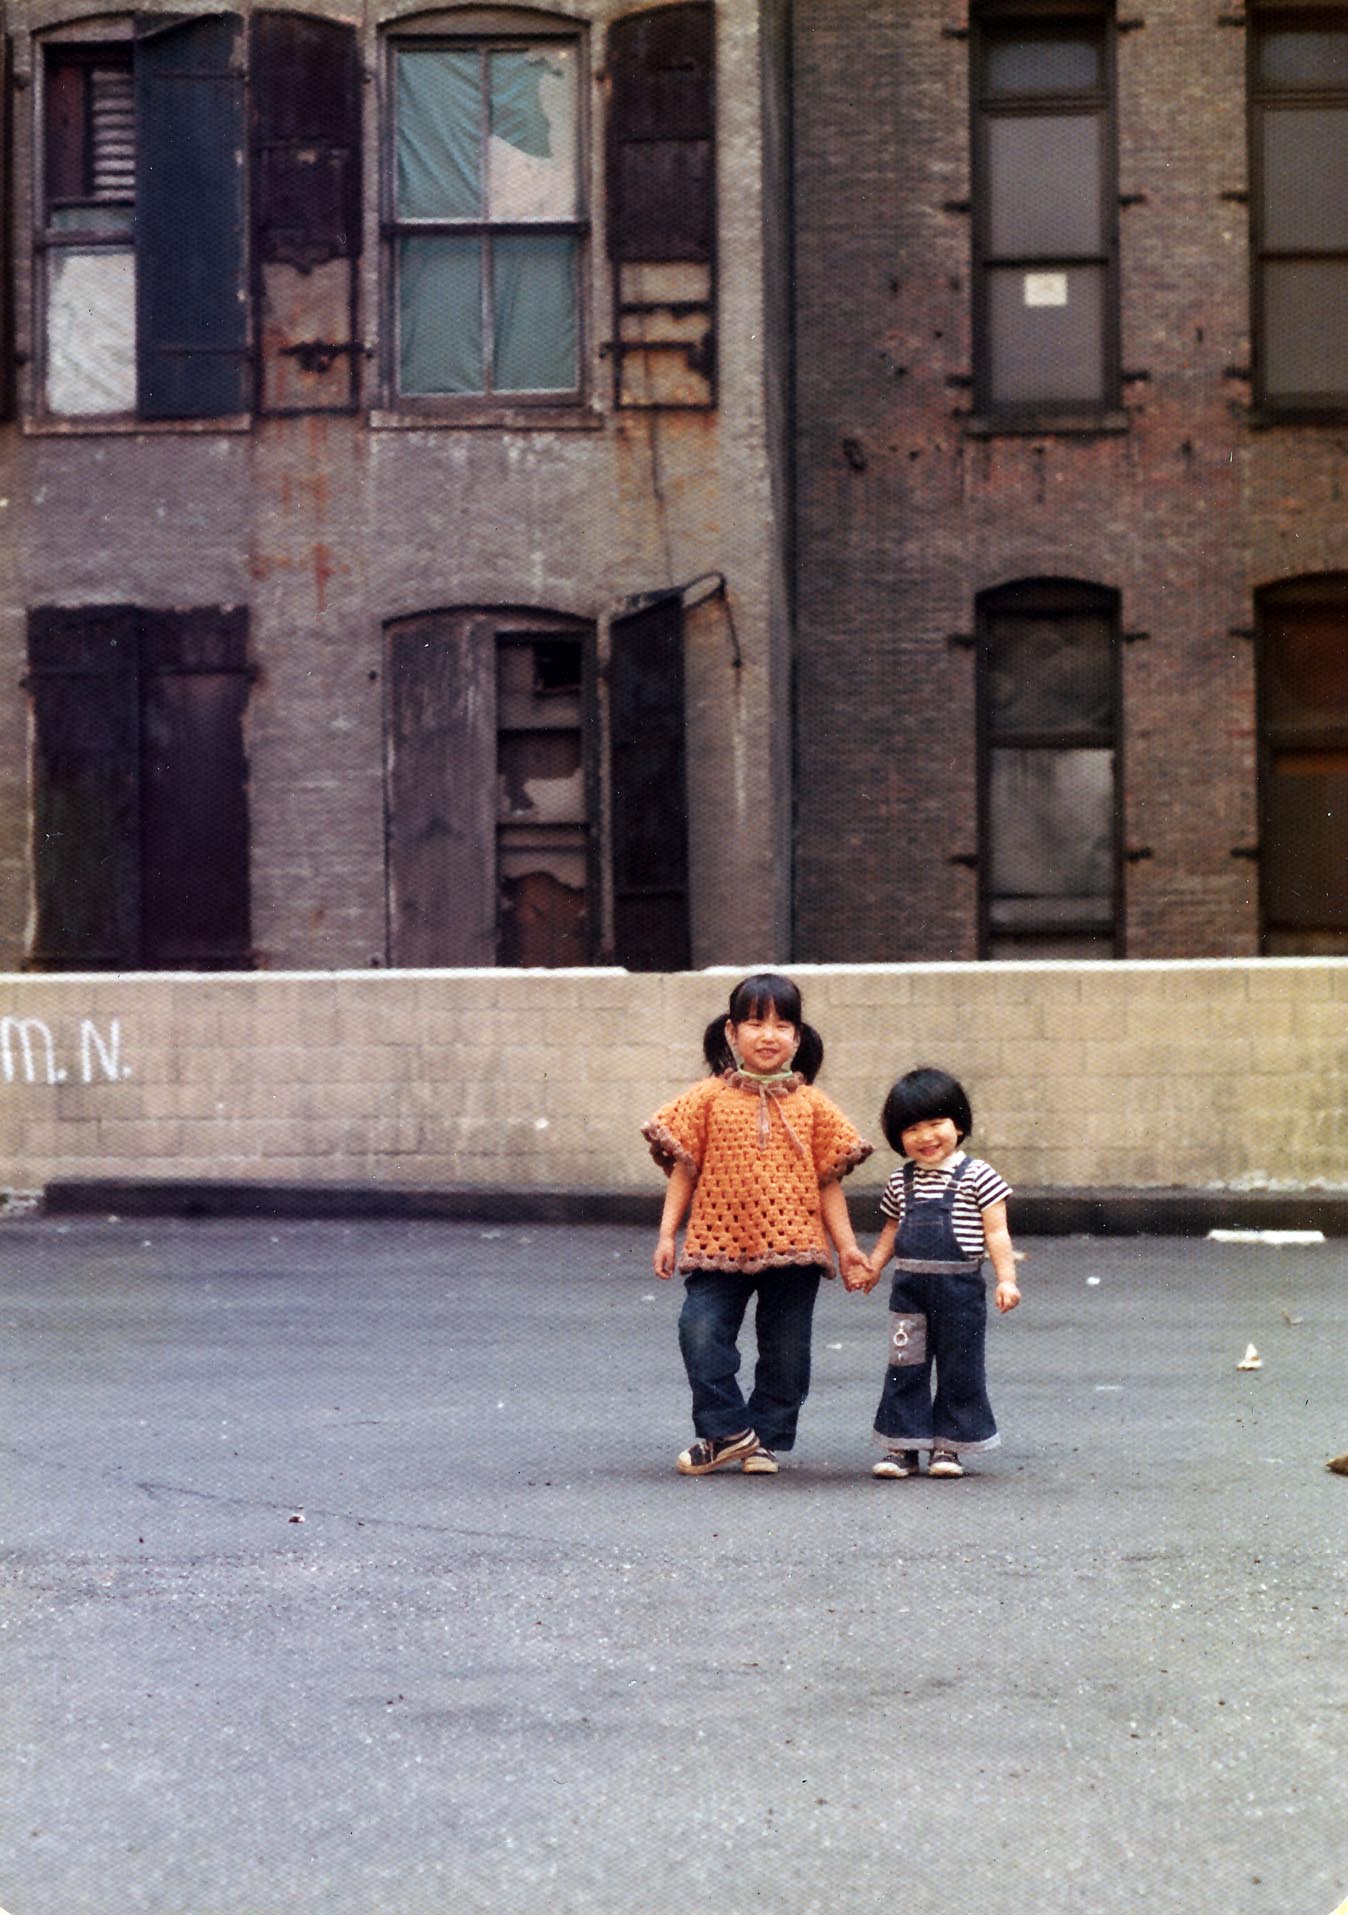 This photo of me and my sister was taken in 1974 in the parking lot on Crosby Street between Prince and Spring, the current site of the Crosby Hotel, where we would often play.